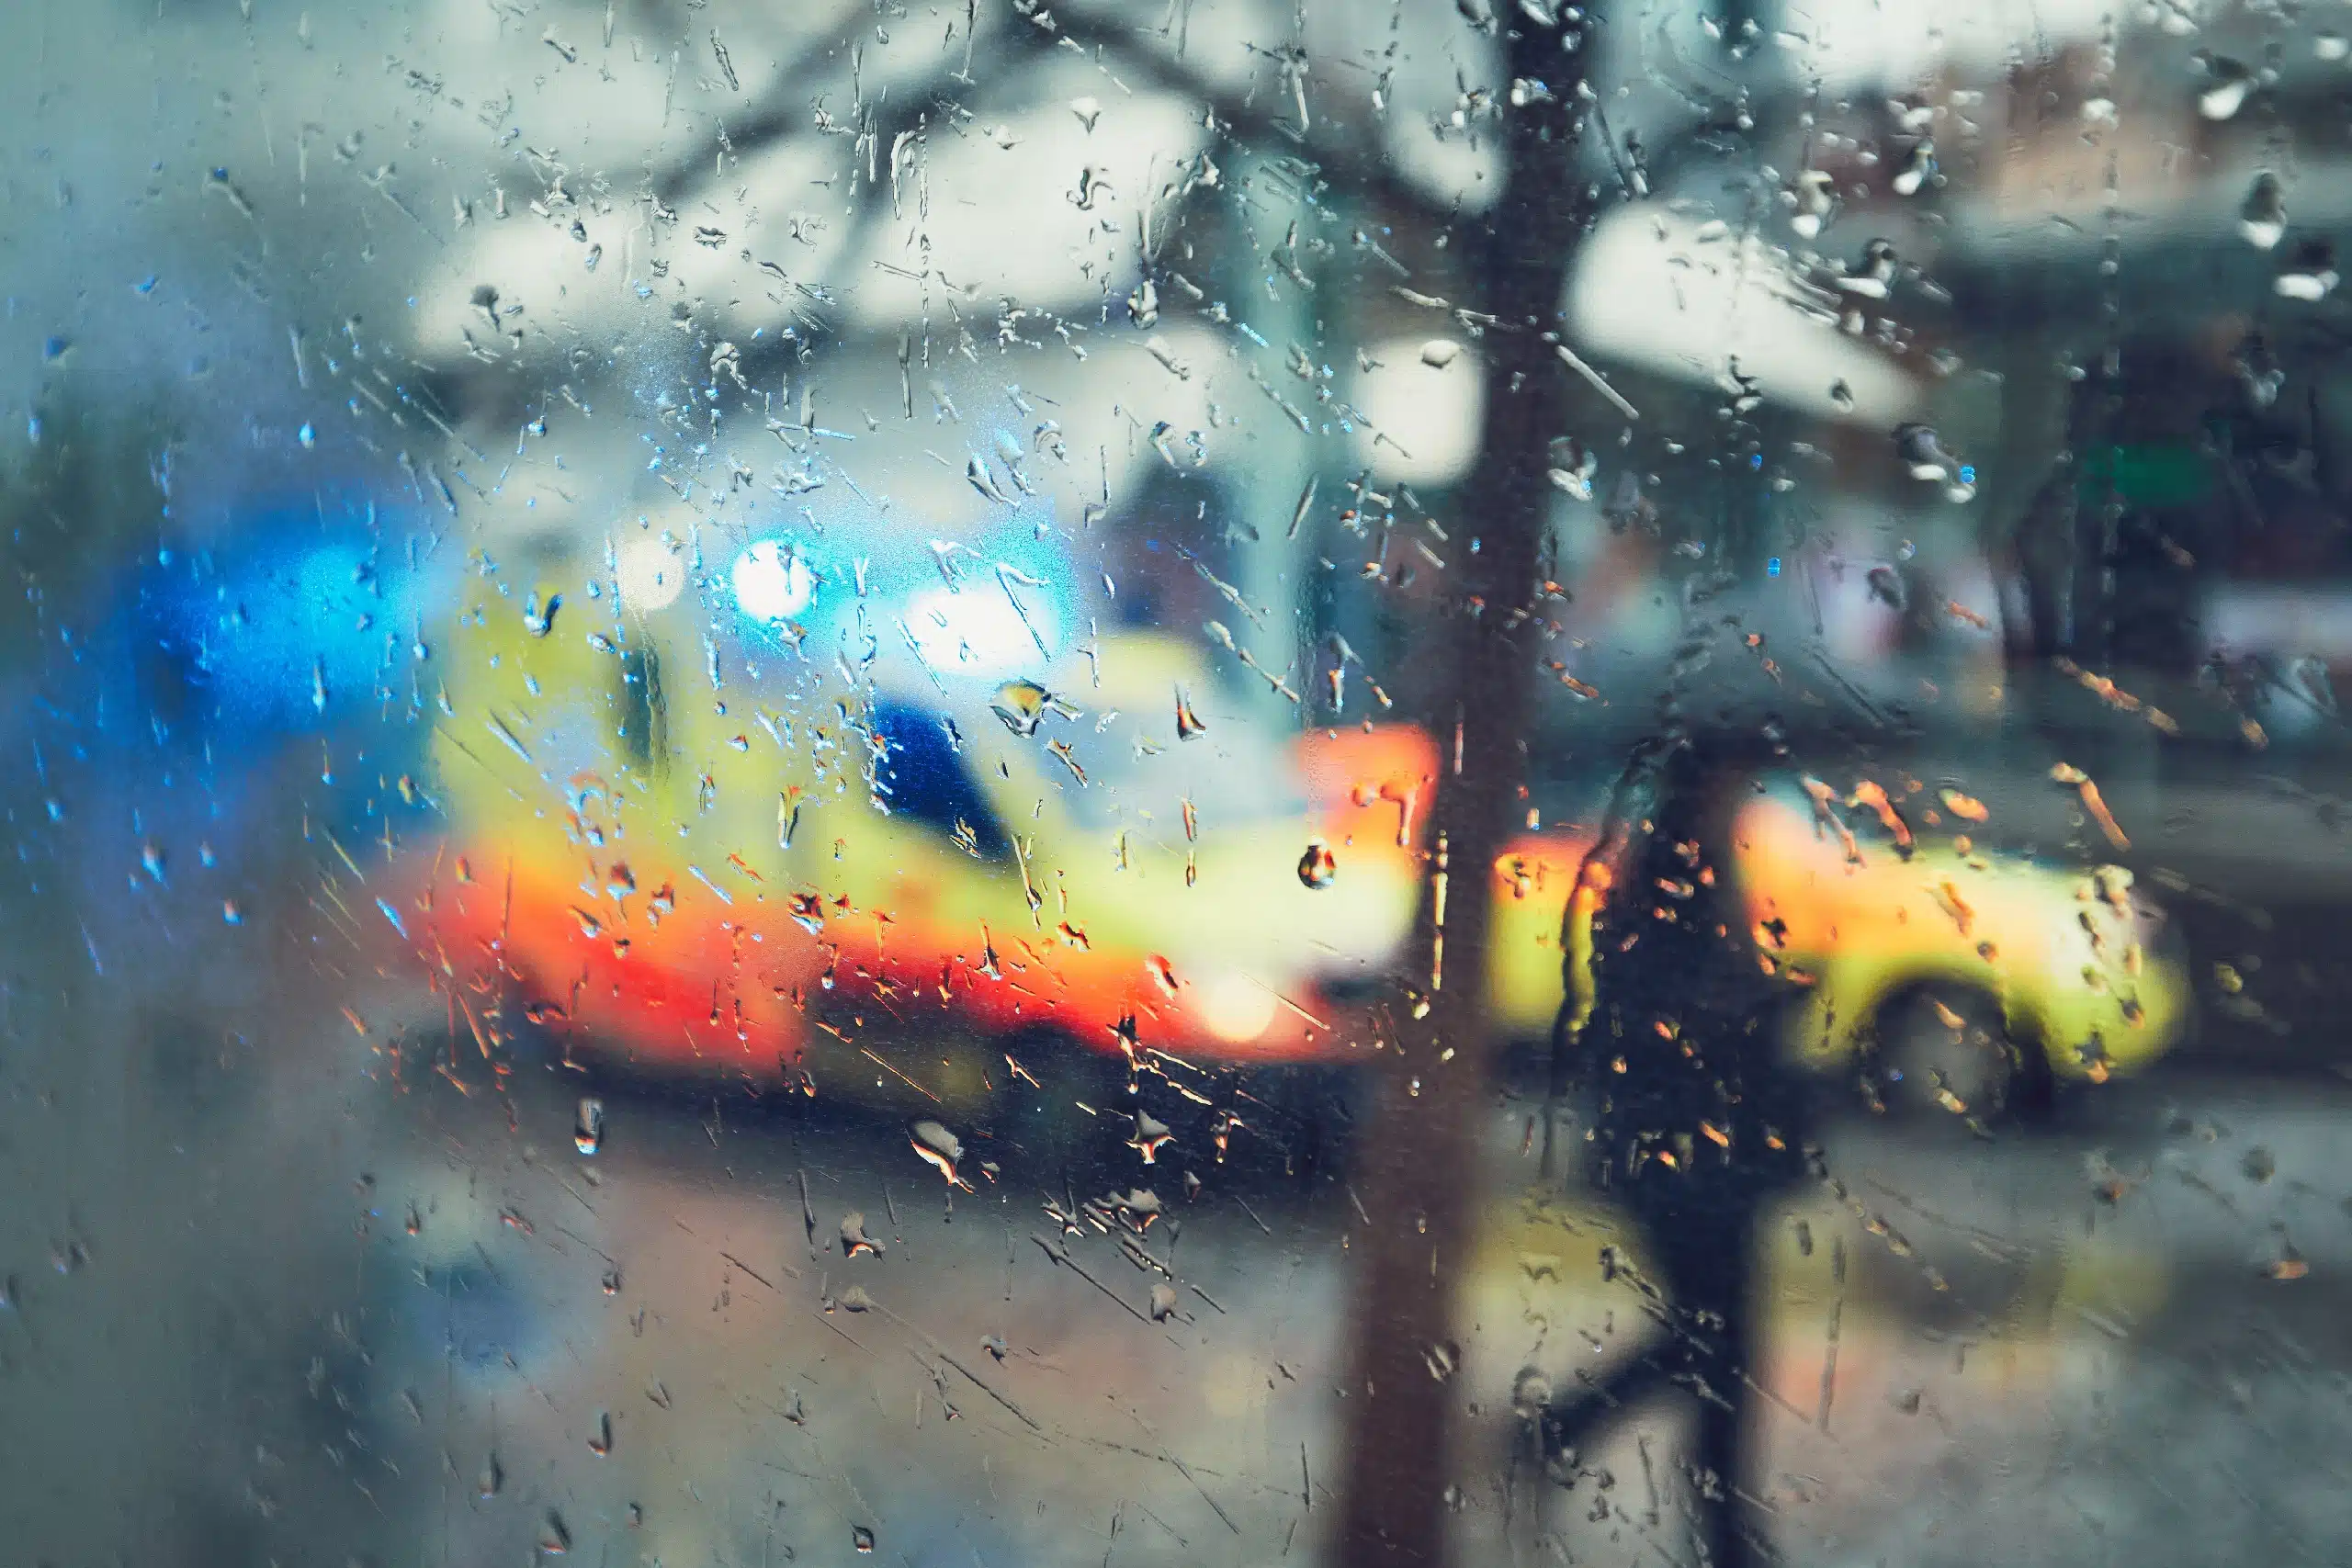 Emergency medical service response in the city. Ambulance cars on the rush street during rain. View through a car window and selective focus on the raindrop. Prague, Czech Republic.